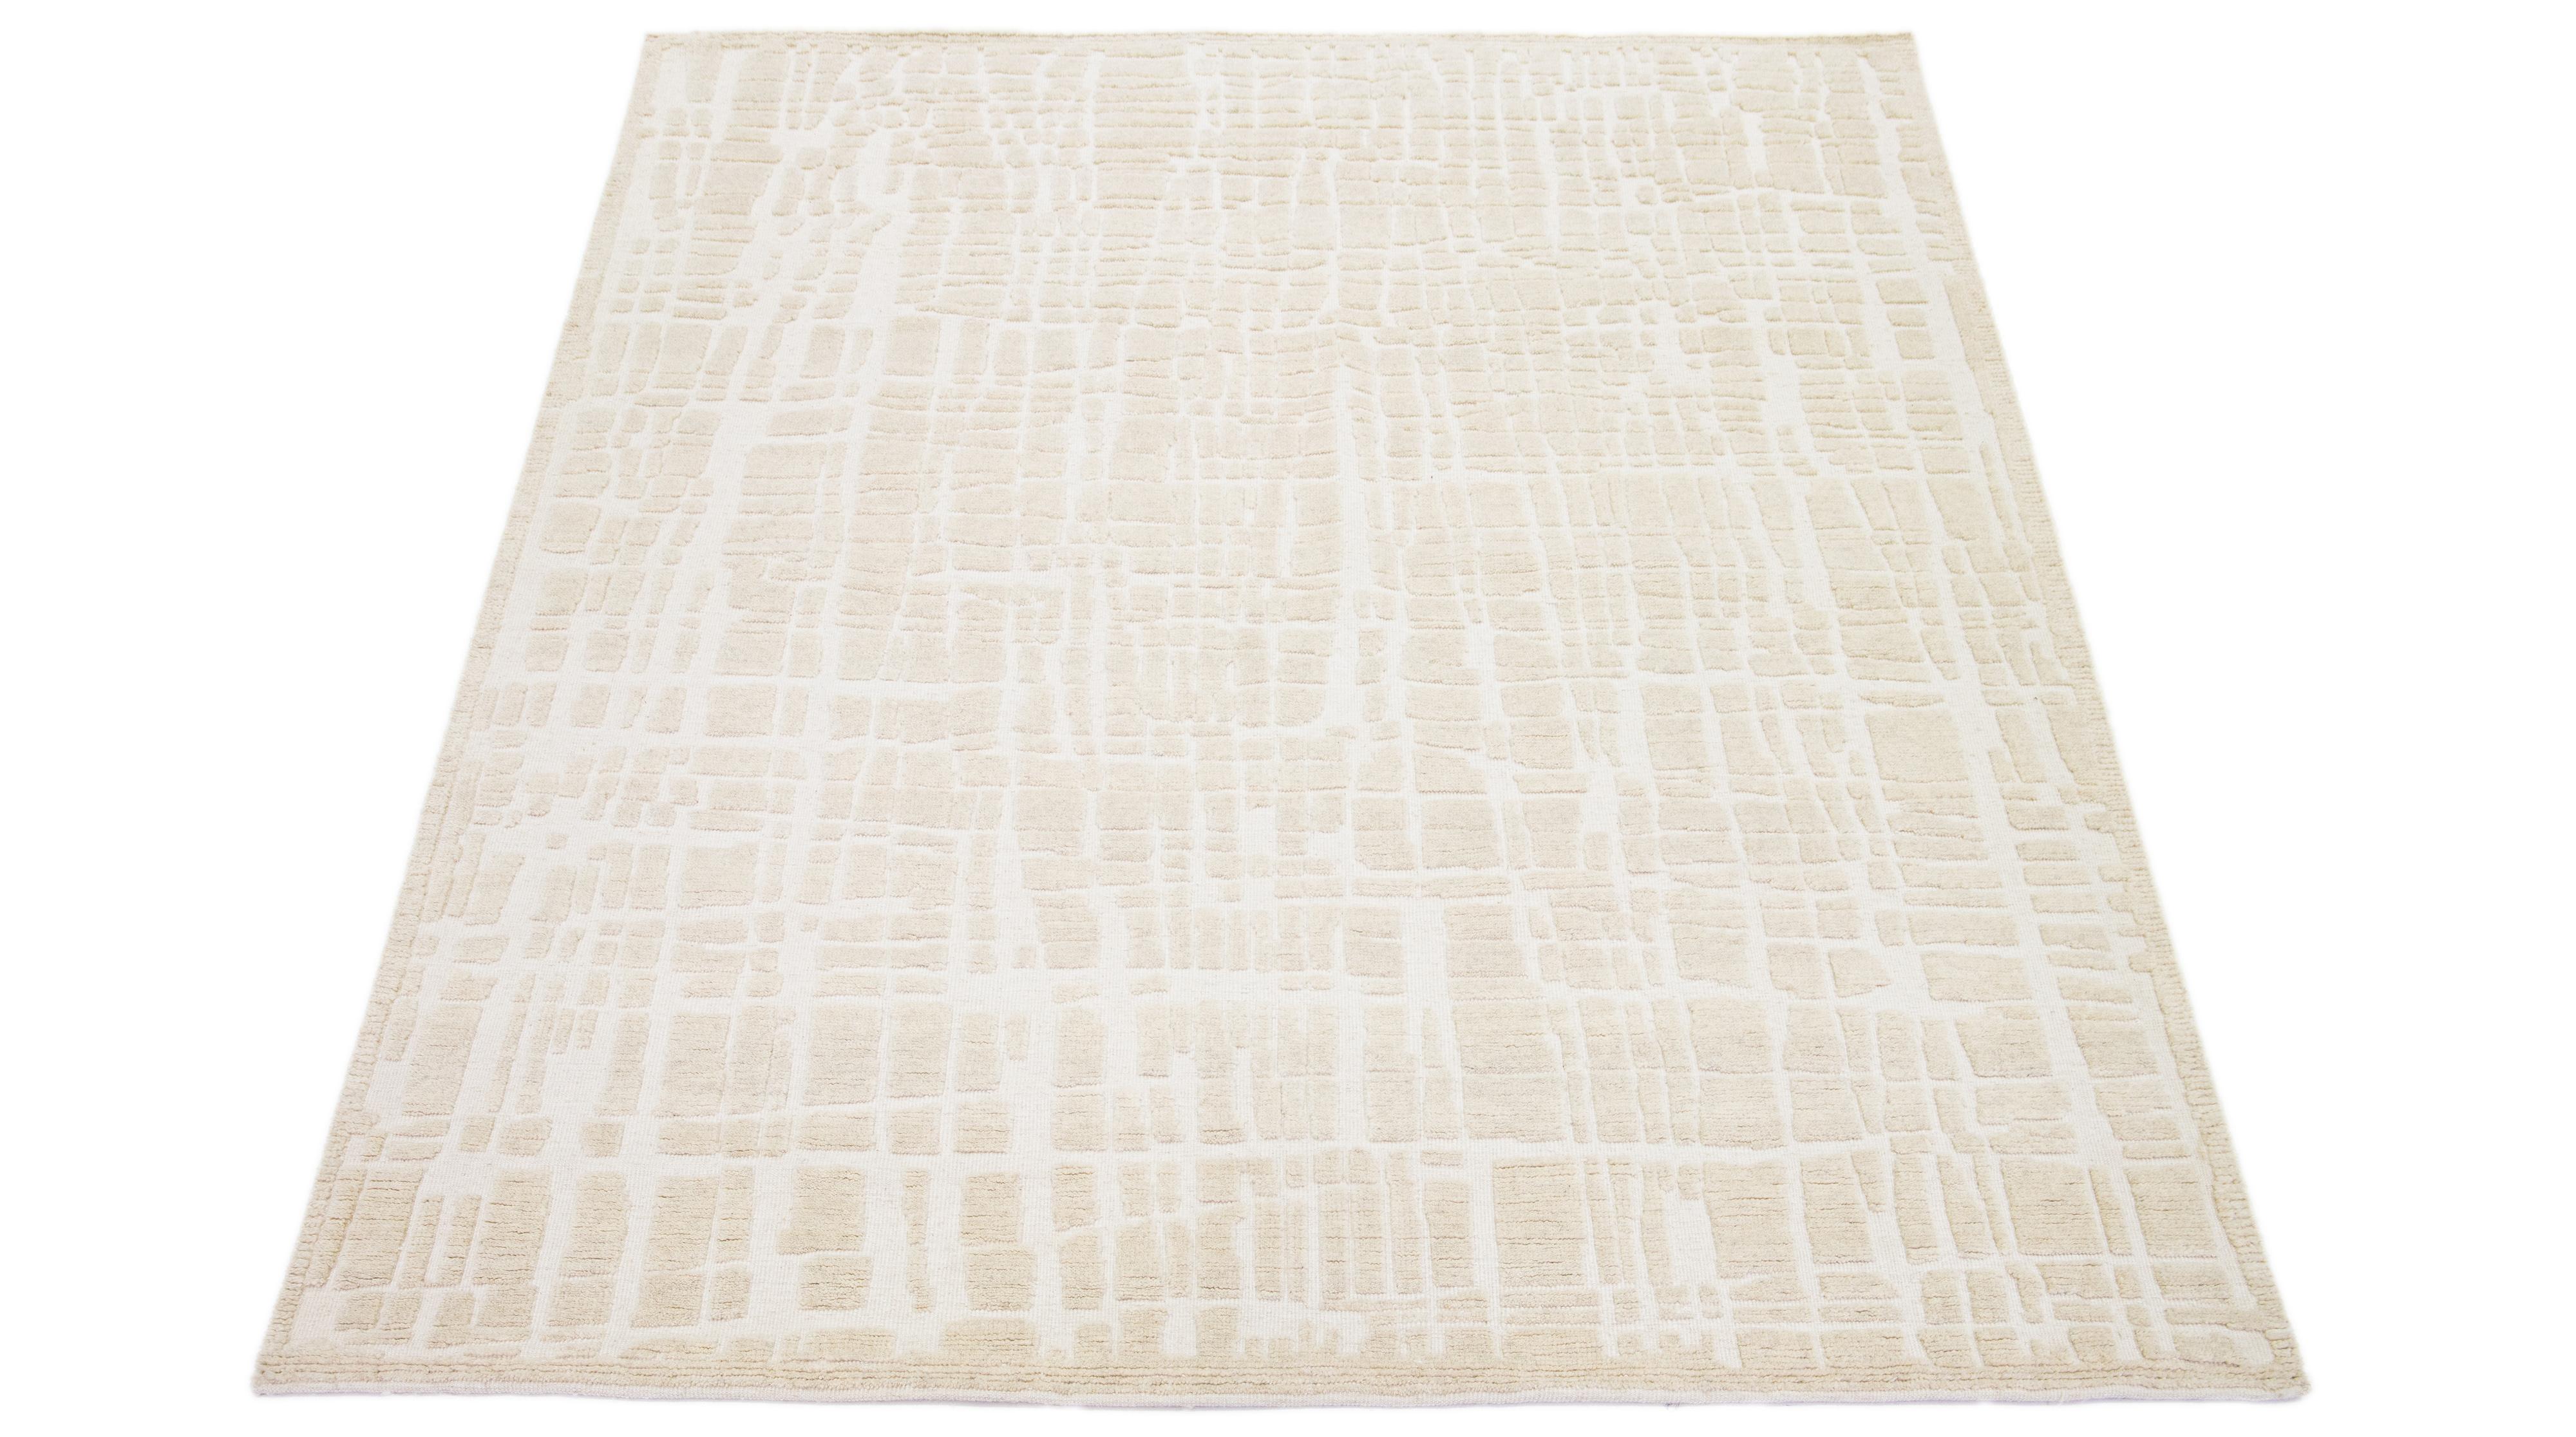 This hand-knotted wool rug showcases a modern Moroccan-inspired motif highlighting understated texture against a bold beige foundation, creating a captivating abstract Design.

This rug measures 8' x 10'1